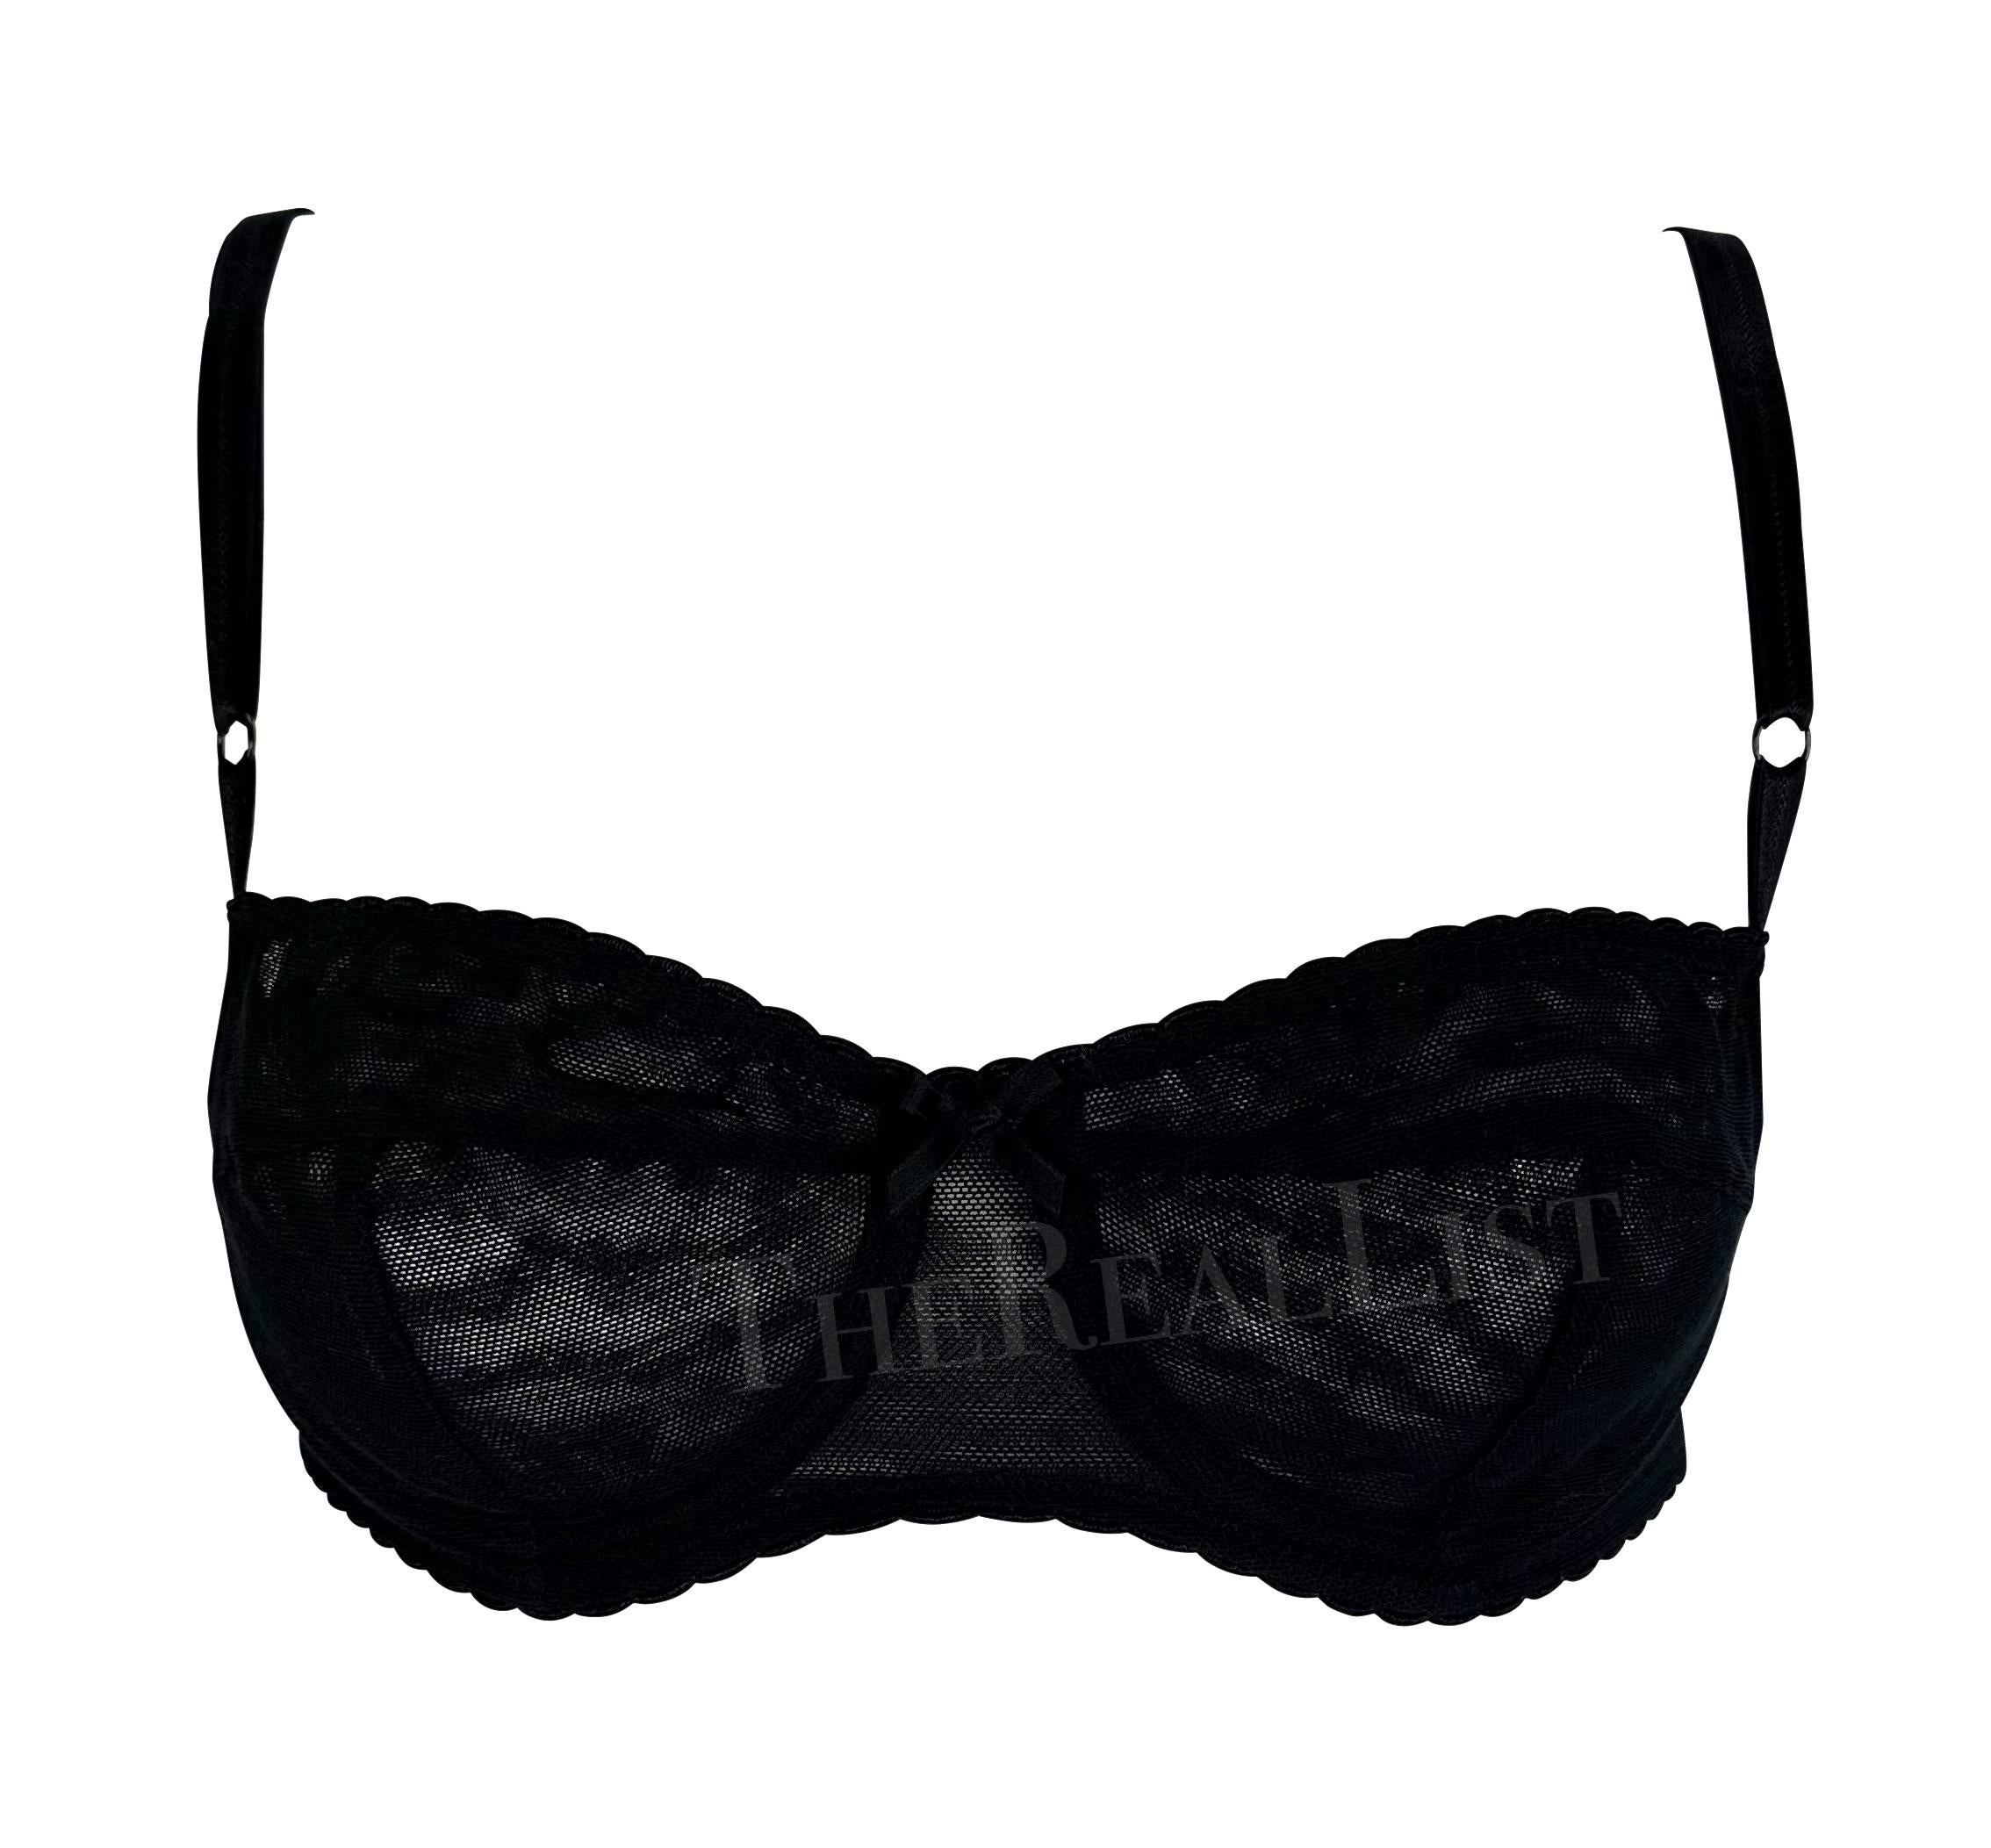 1990s Dolce & Gabbana Sheer Black Mesh Dress Bra Set In Excellent Condition For Sale In West Hollywood, CA